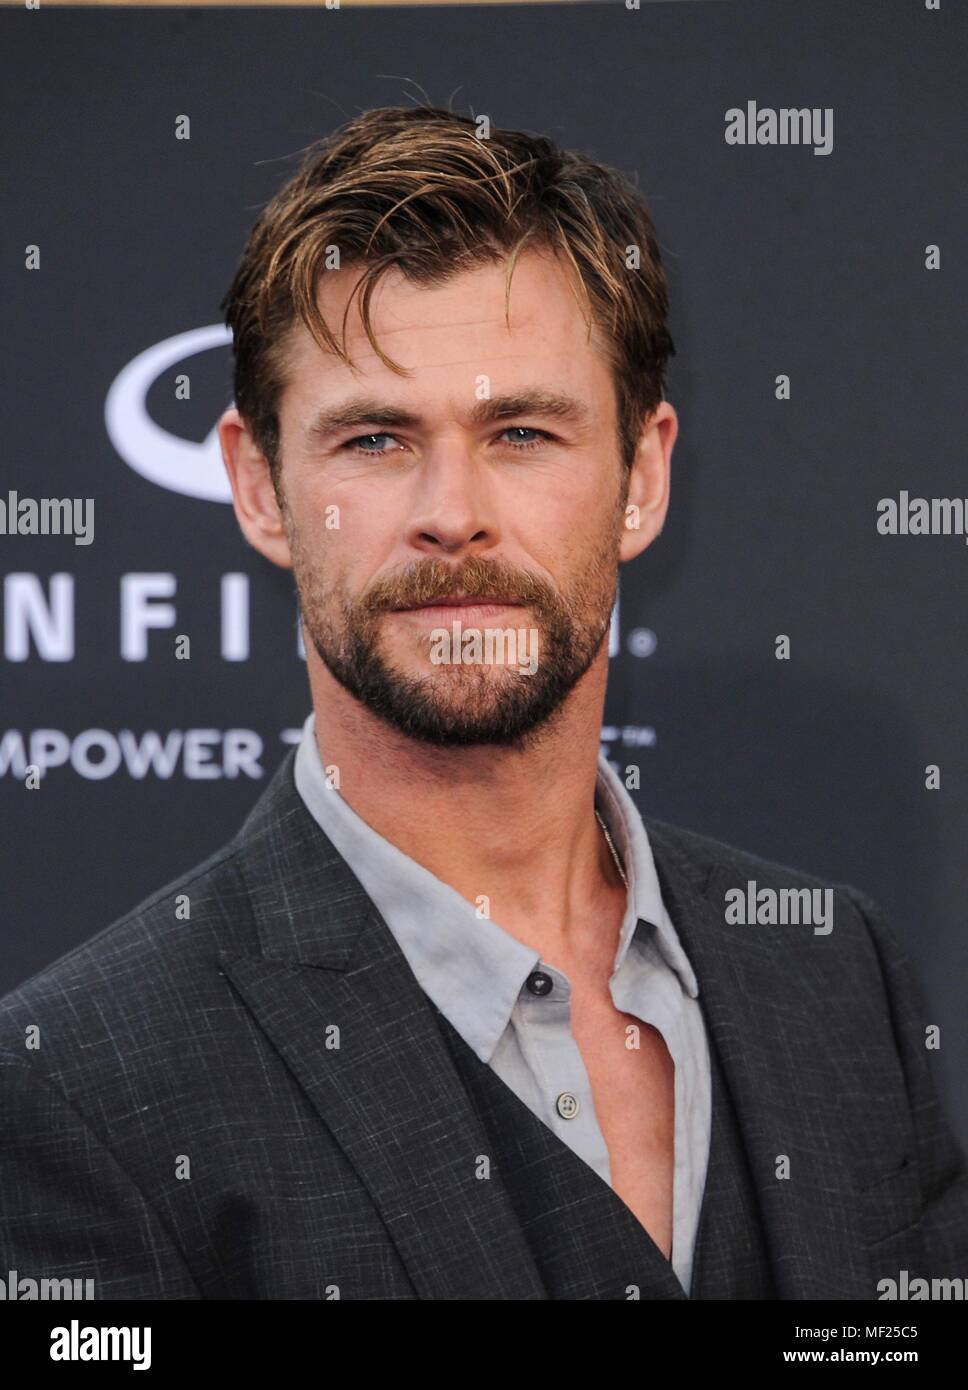 Chris Hemsworth at arrivals for AVENGERS: INFINITY WAR Premiere - Part 2, Hollywood, Los Angeles, CA April 23, 2018. Photo By: Elizabeth Goodenough/Everett Collection Stock Photo